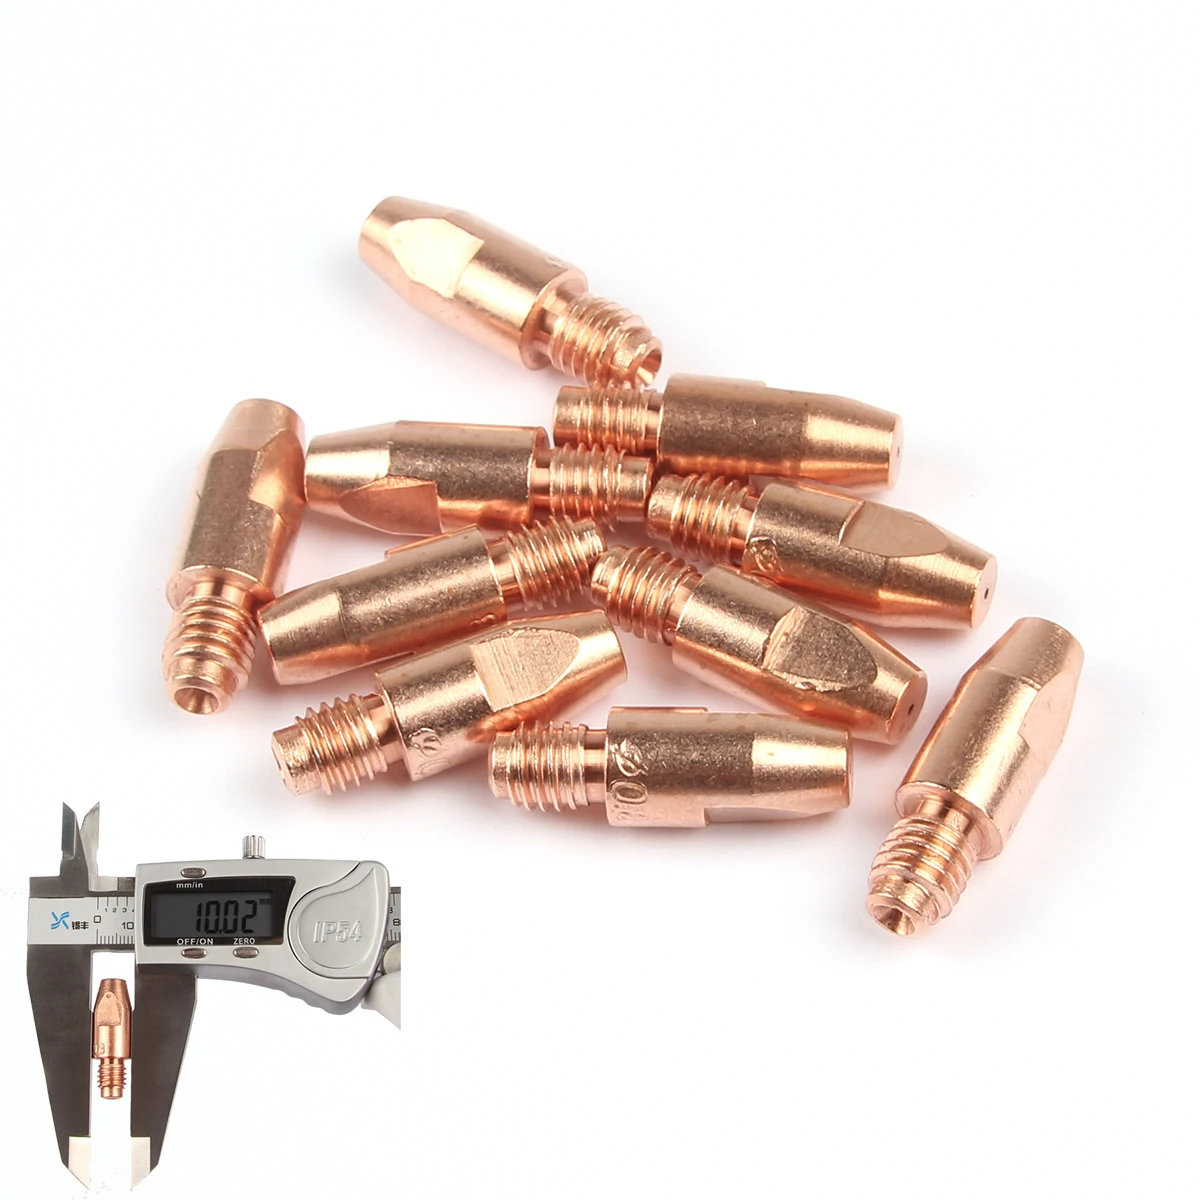 10Pcs MB 36KD Contact Tips Consumables M8*30mm 0.8/1.0/1.2mm Holder Torch Gun Nozzle MIG/MAG Co2/Gas Accessories Soldering Tool